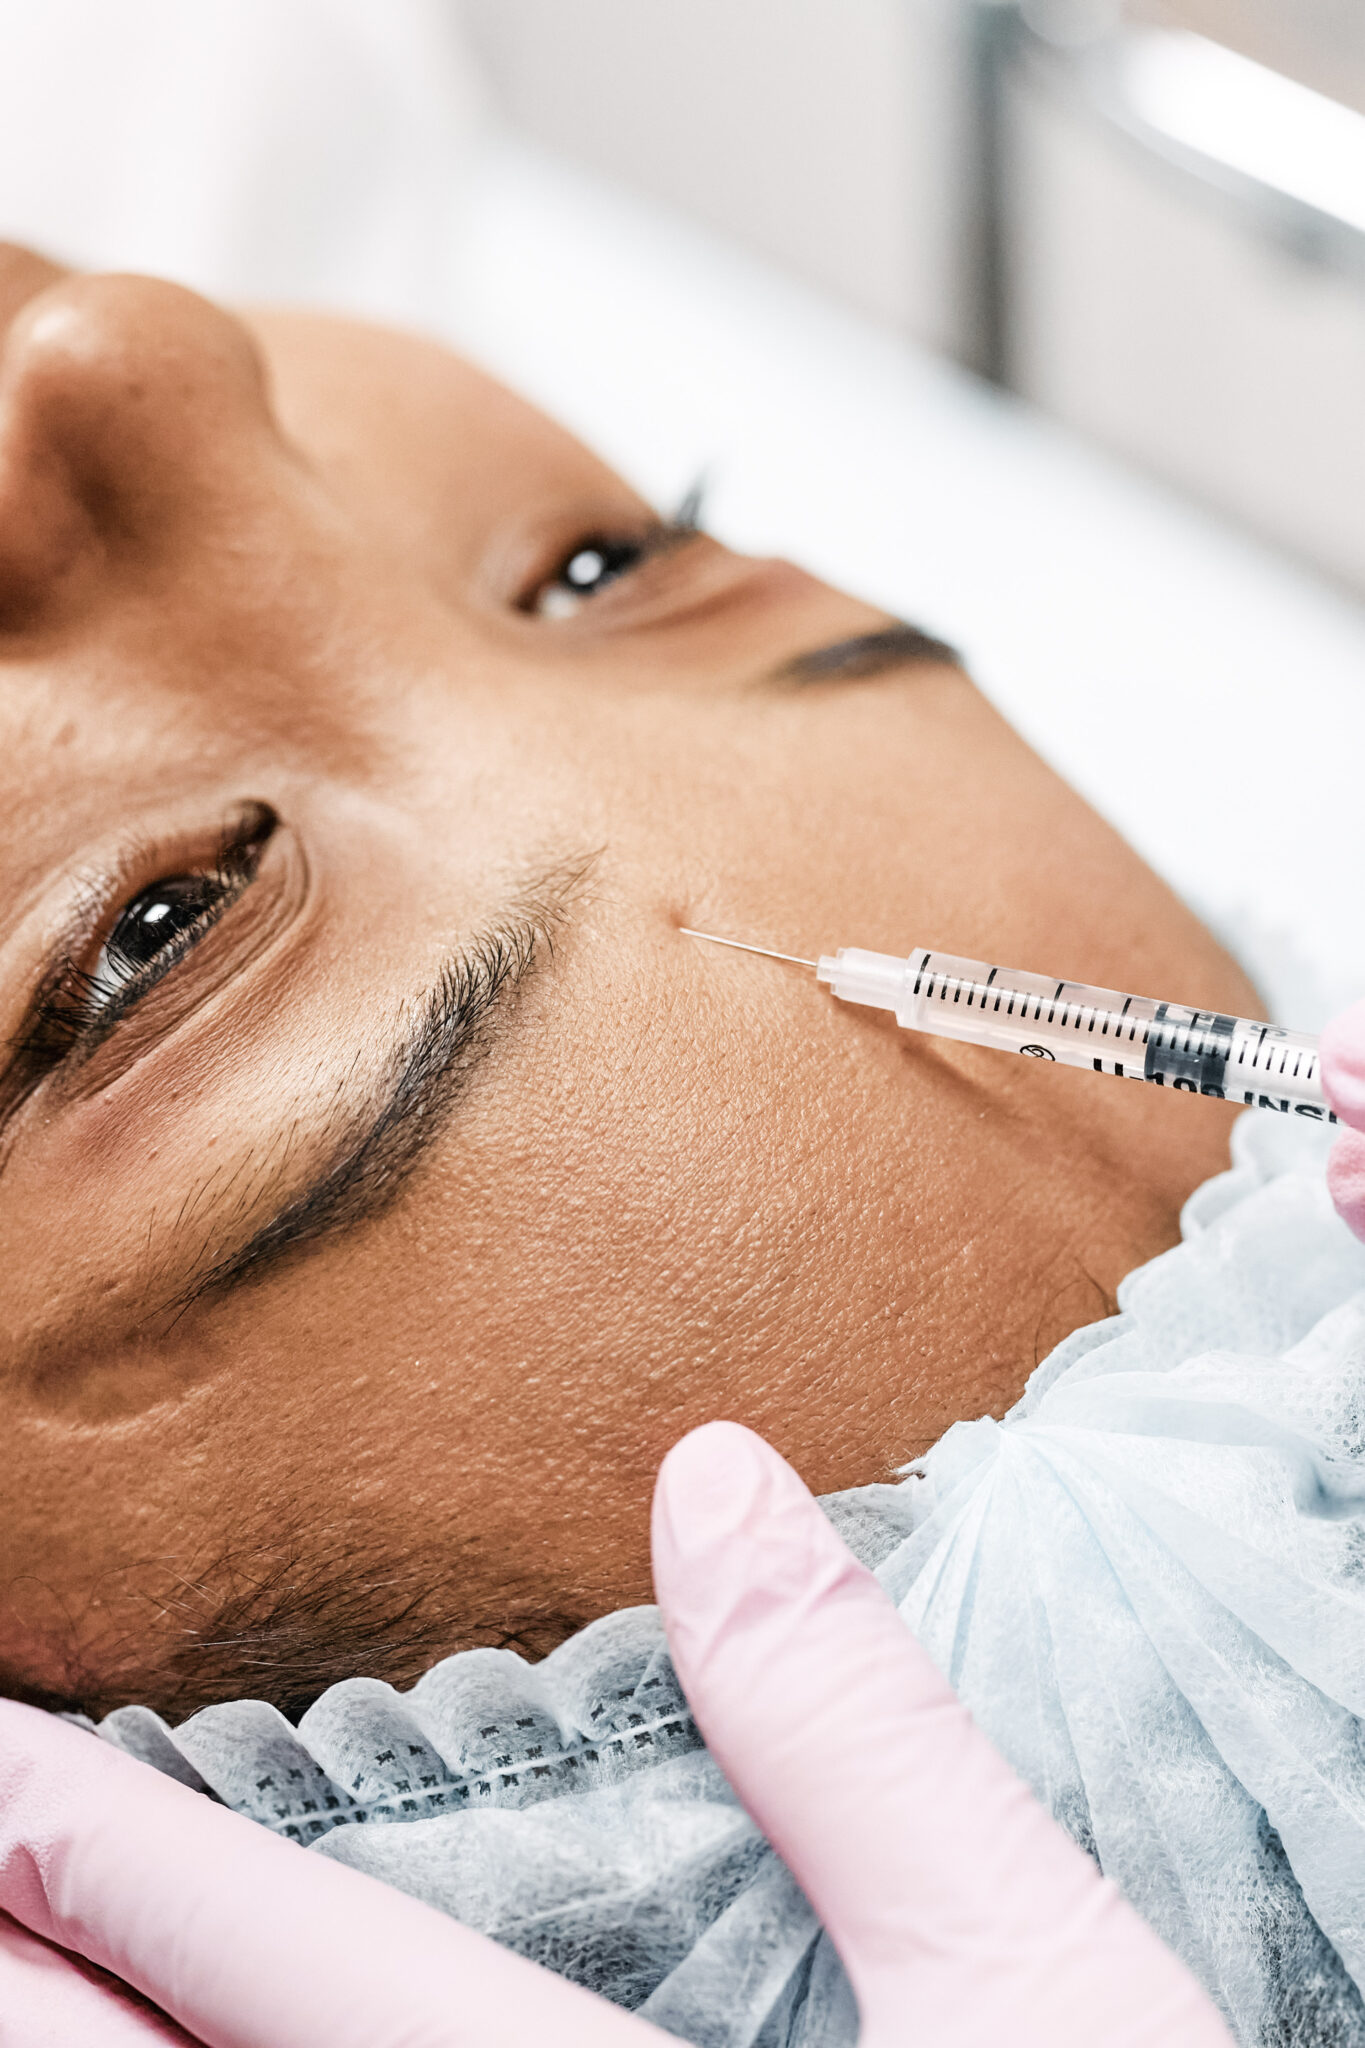 Botox Vs Fillers: What Do You Need?